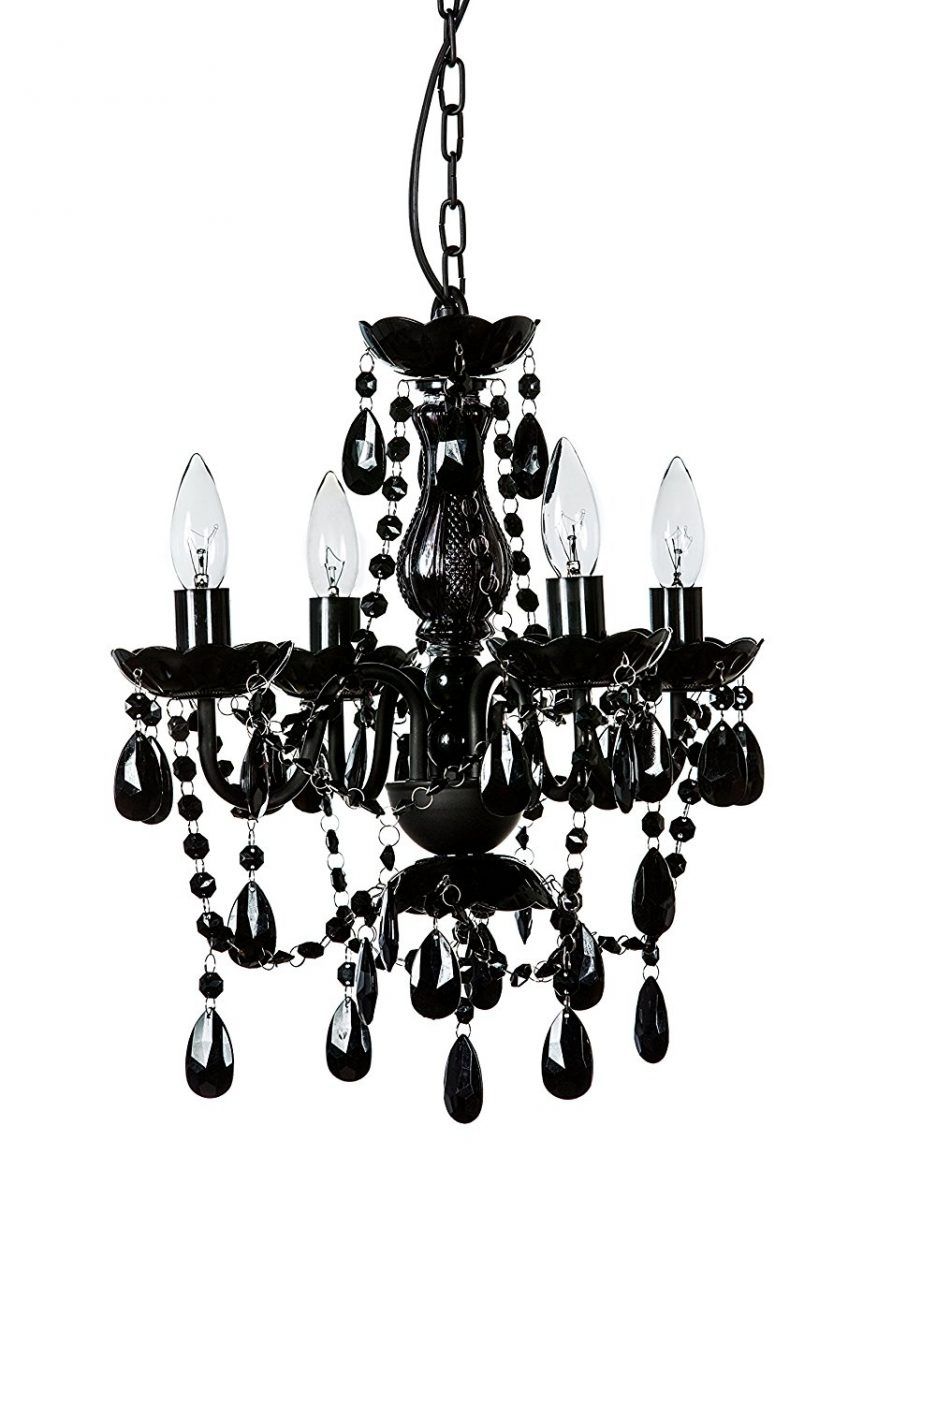 The Original Gypsy Color 4 Light Small Black Chandelier Black With Antique Black Chandelier (View 8 of 12)